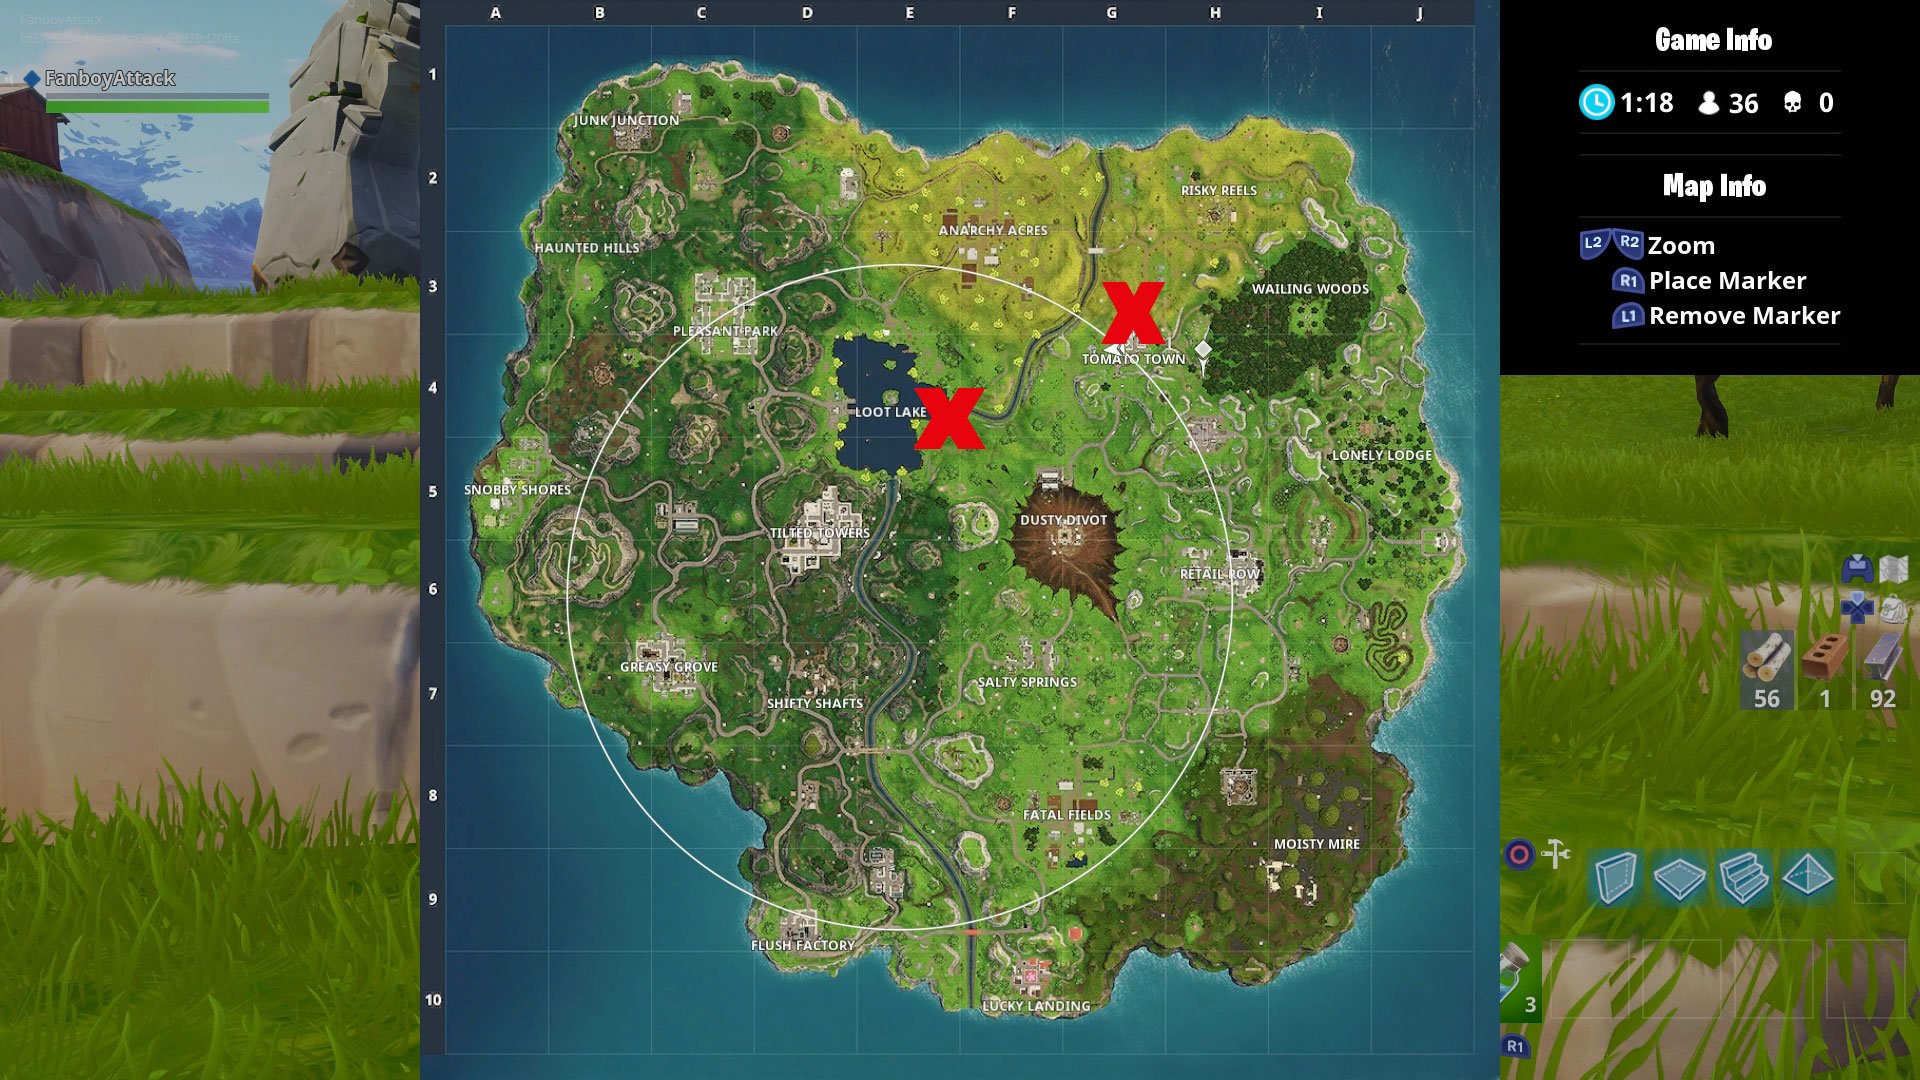 Fortnite Tomato Town Map Challenge Fortnite Battle Royale Tomato Town Treasure Map Location Attack Of The Fanboy